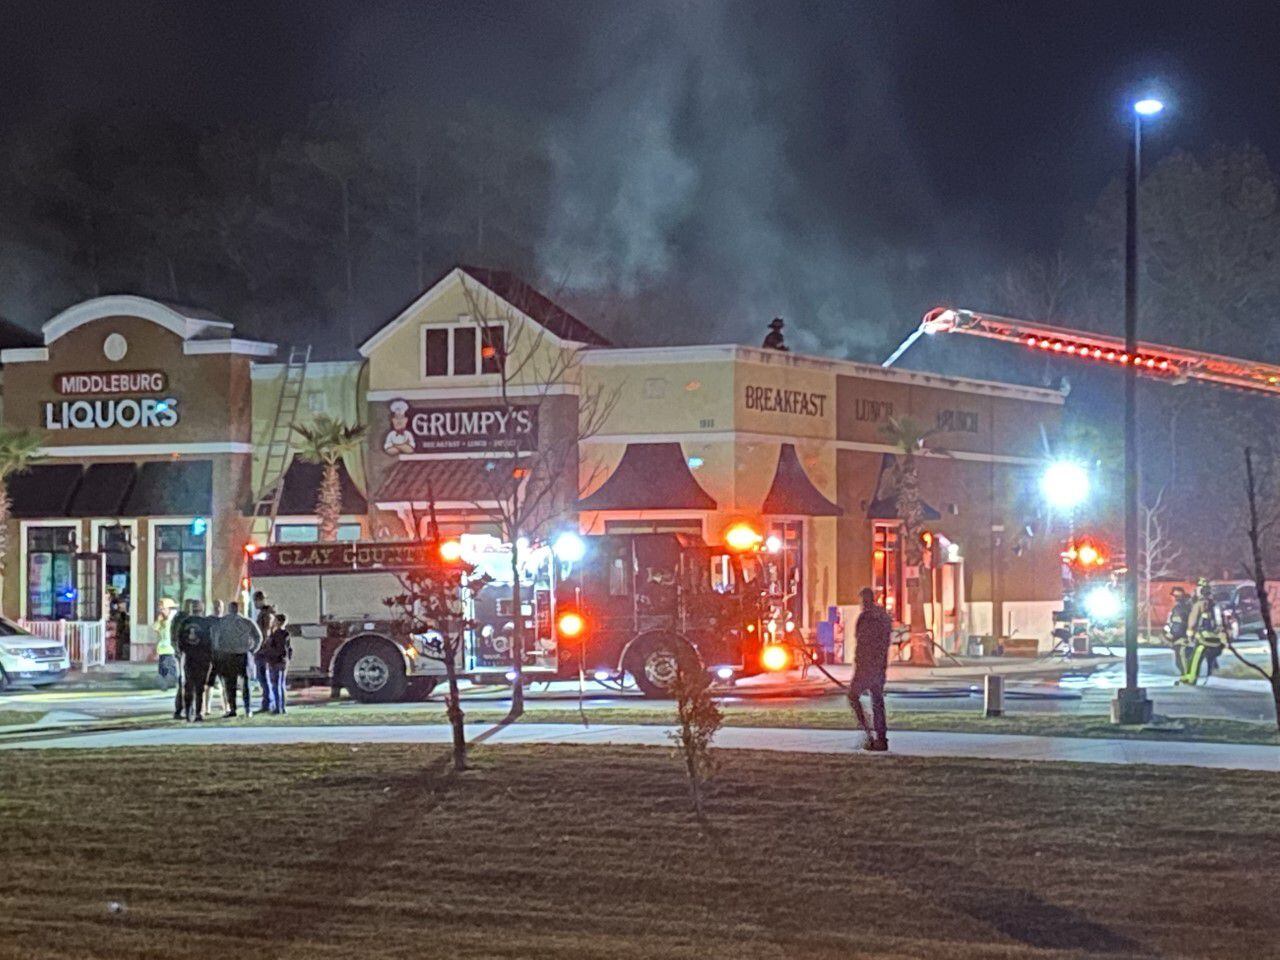 Firefighters bring fire under control at Grumpy’s Restaurant in Middleburg